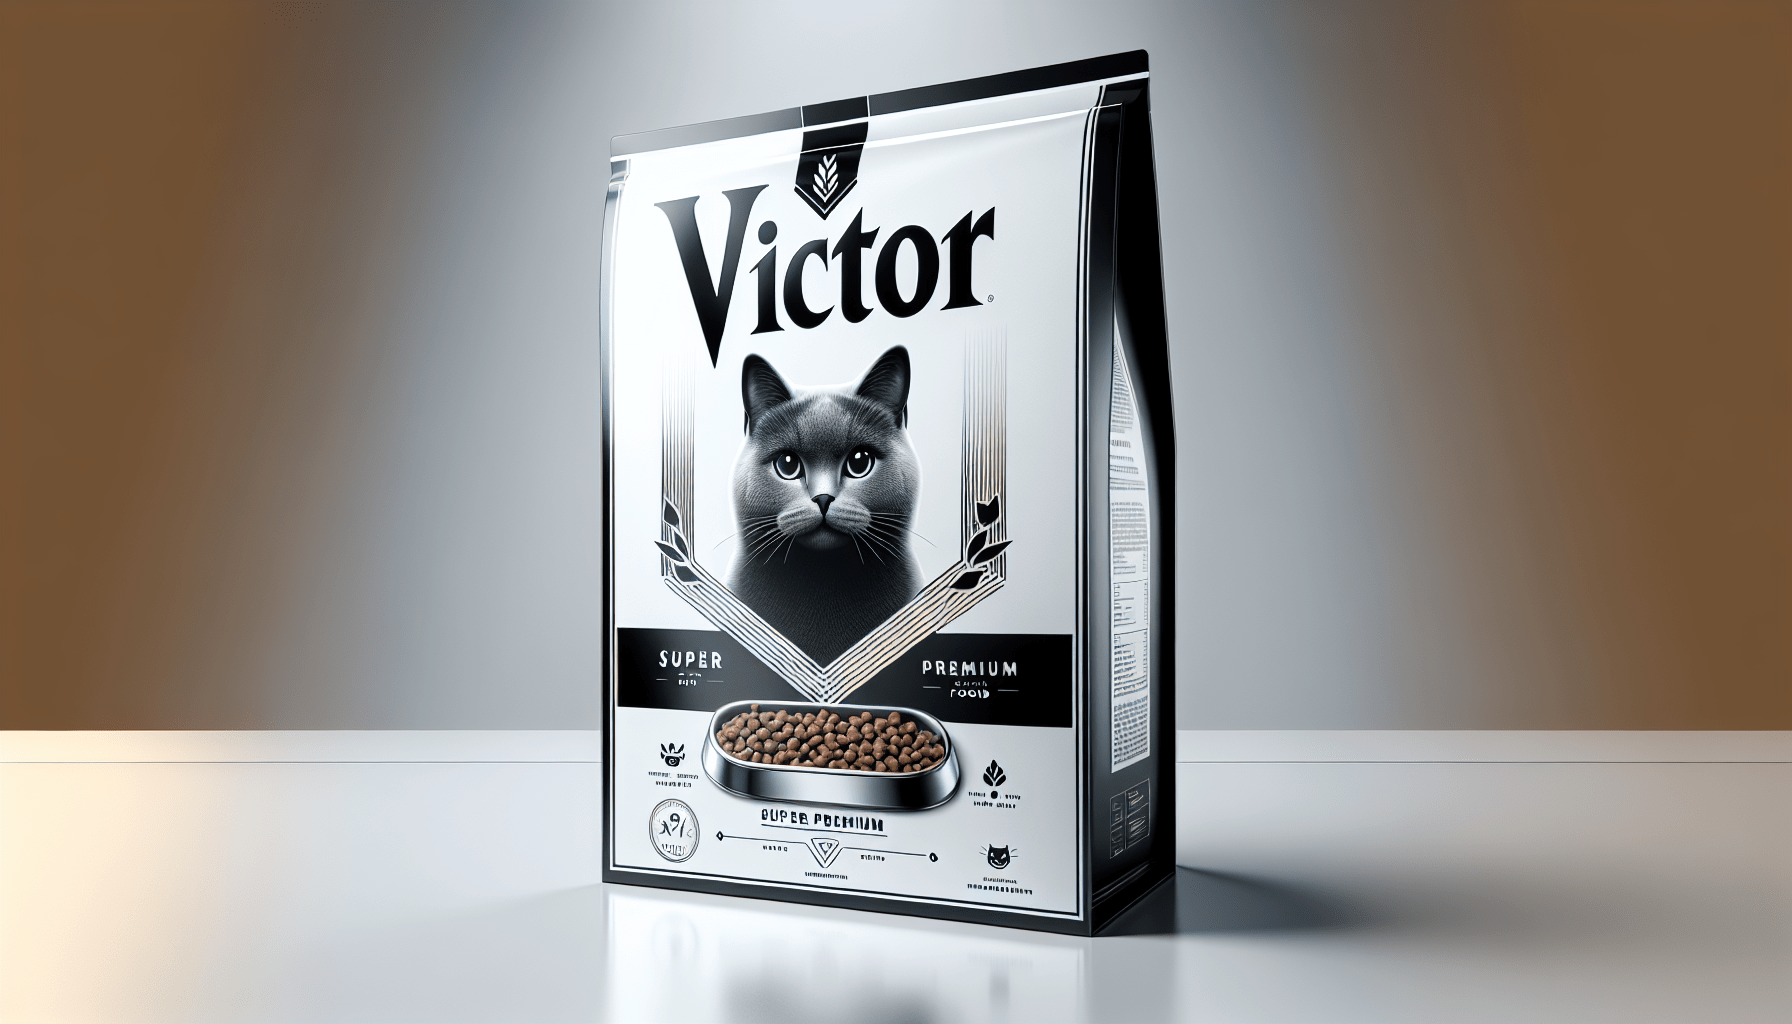 Victor Super Premium Cat Food – Turkey and Salmon Dinner Pâté – Canned Wet Food for Indoor and Outdoor Cats and Kittens - All Breed Sizes and All Life Stages, 24 x 5.5 oz Cans